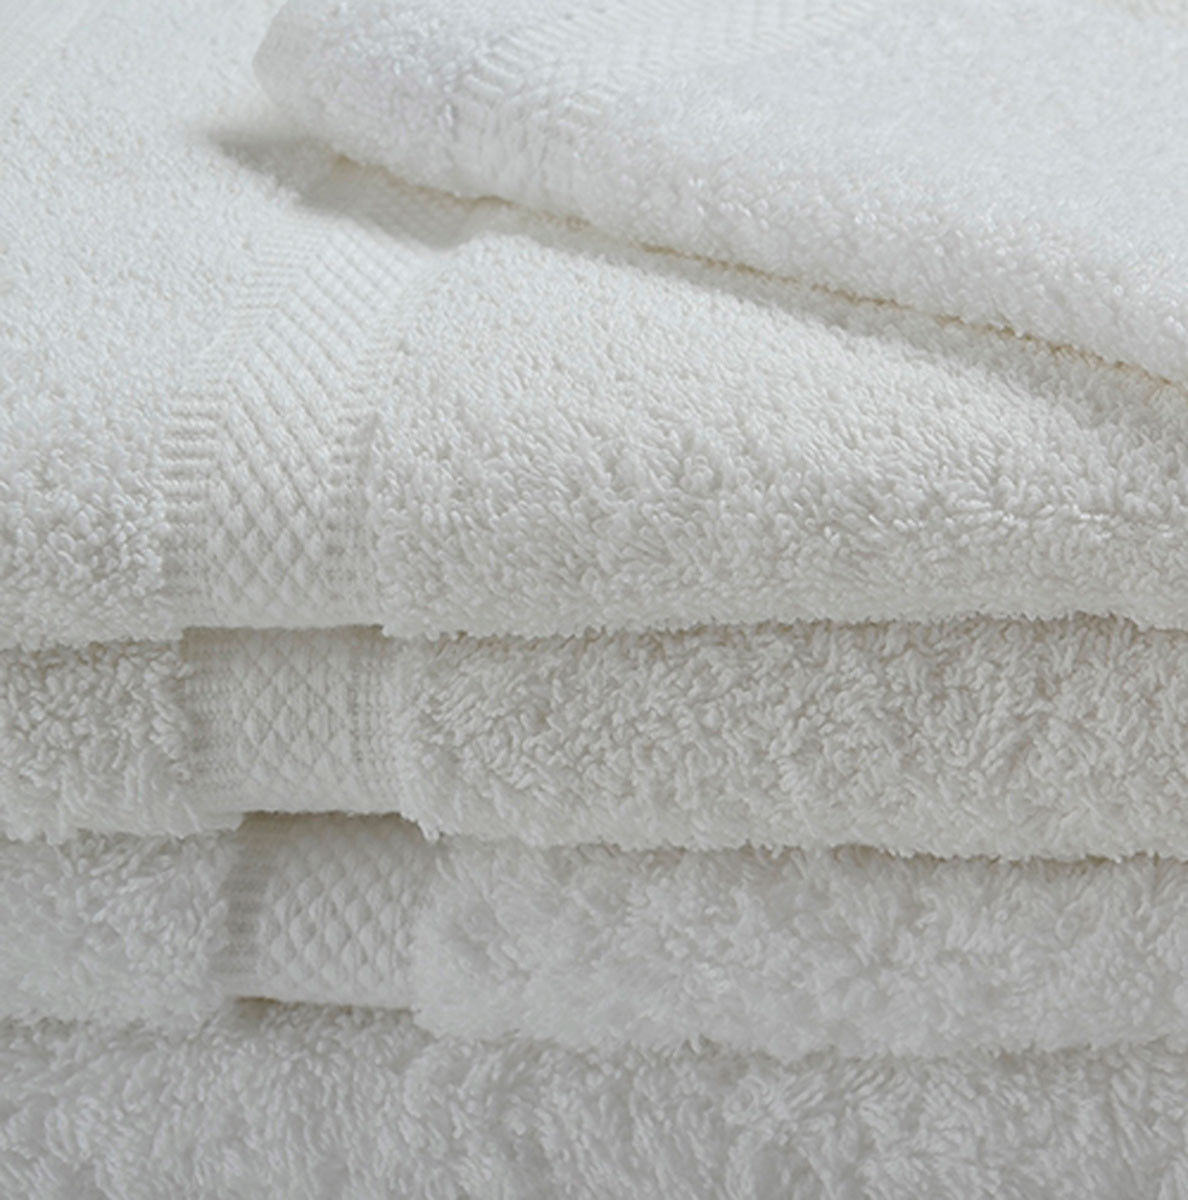 What long-term benefits do Oxford Imperiale towels provide?